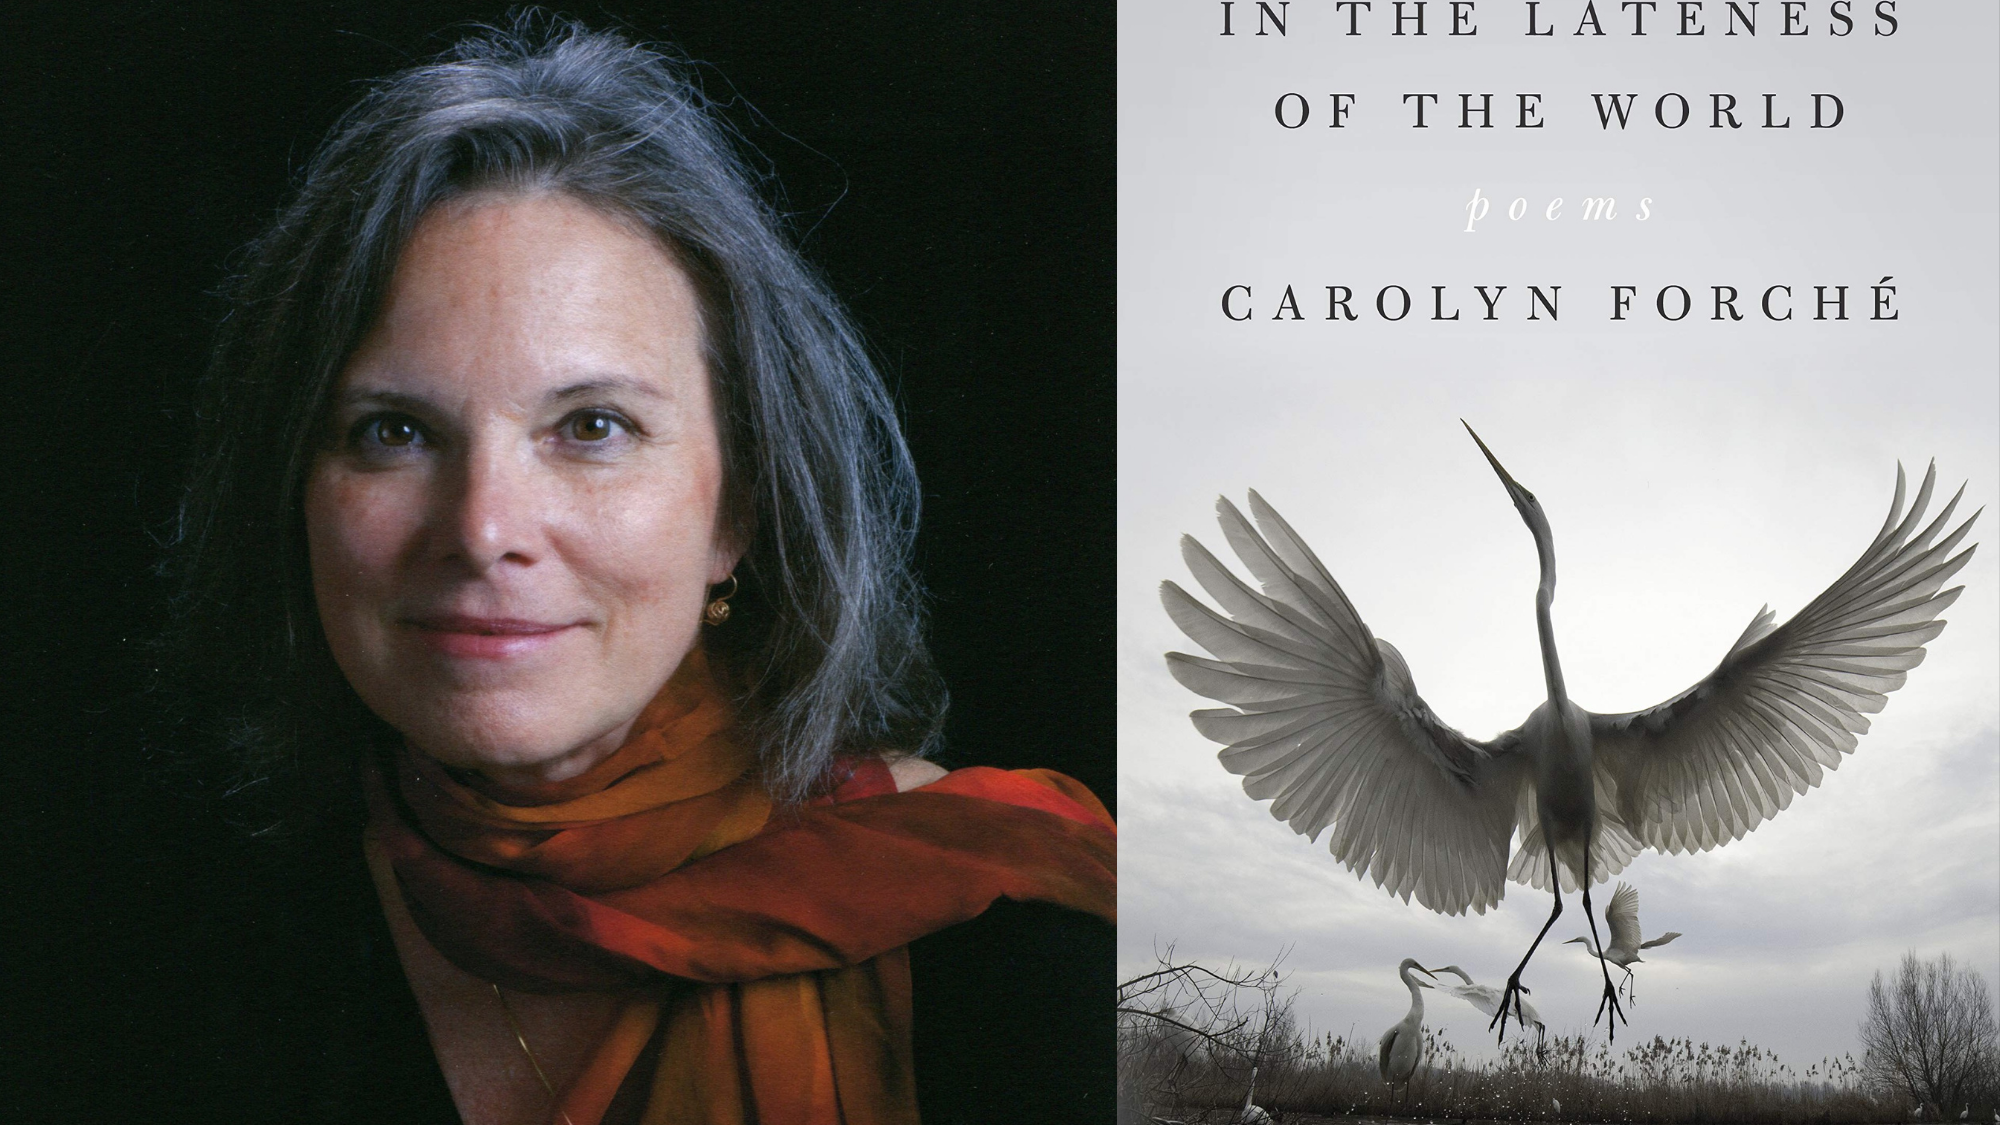 Carolyn Forche with book cover for In the Lateness of the World